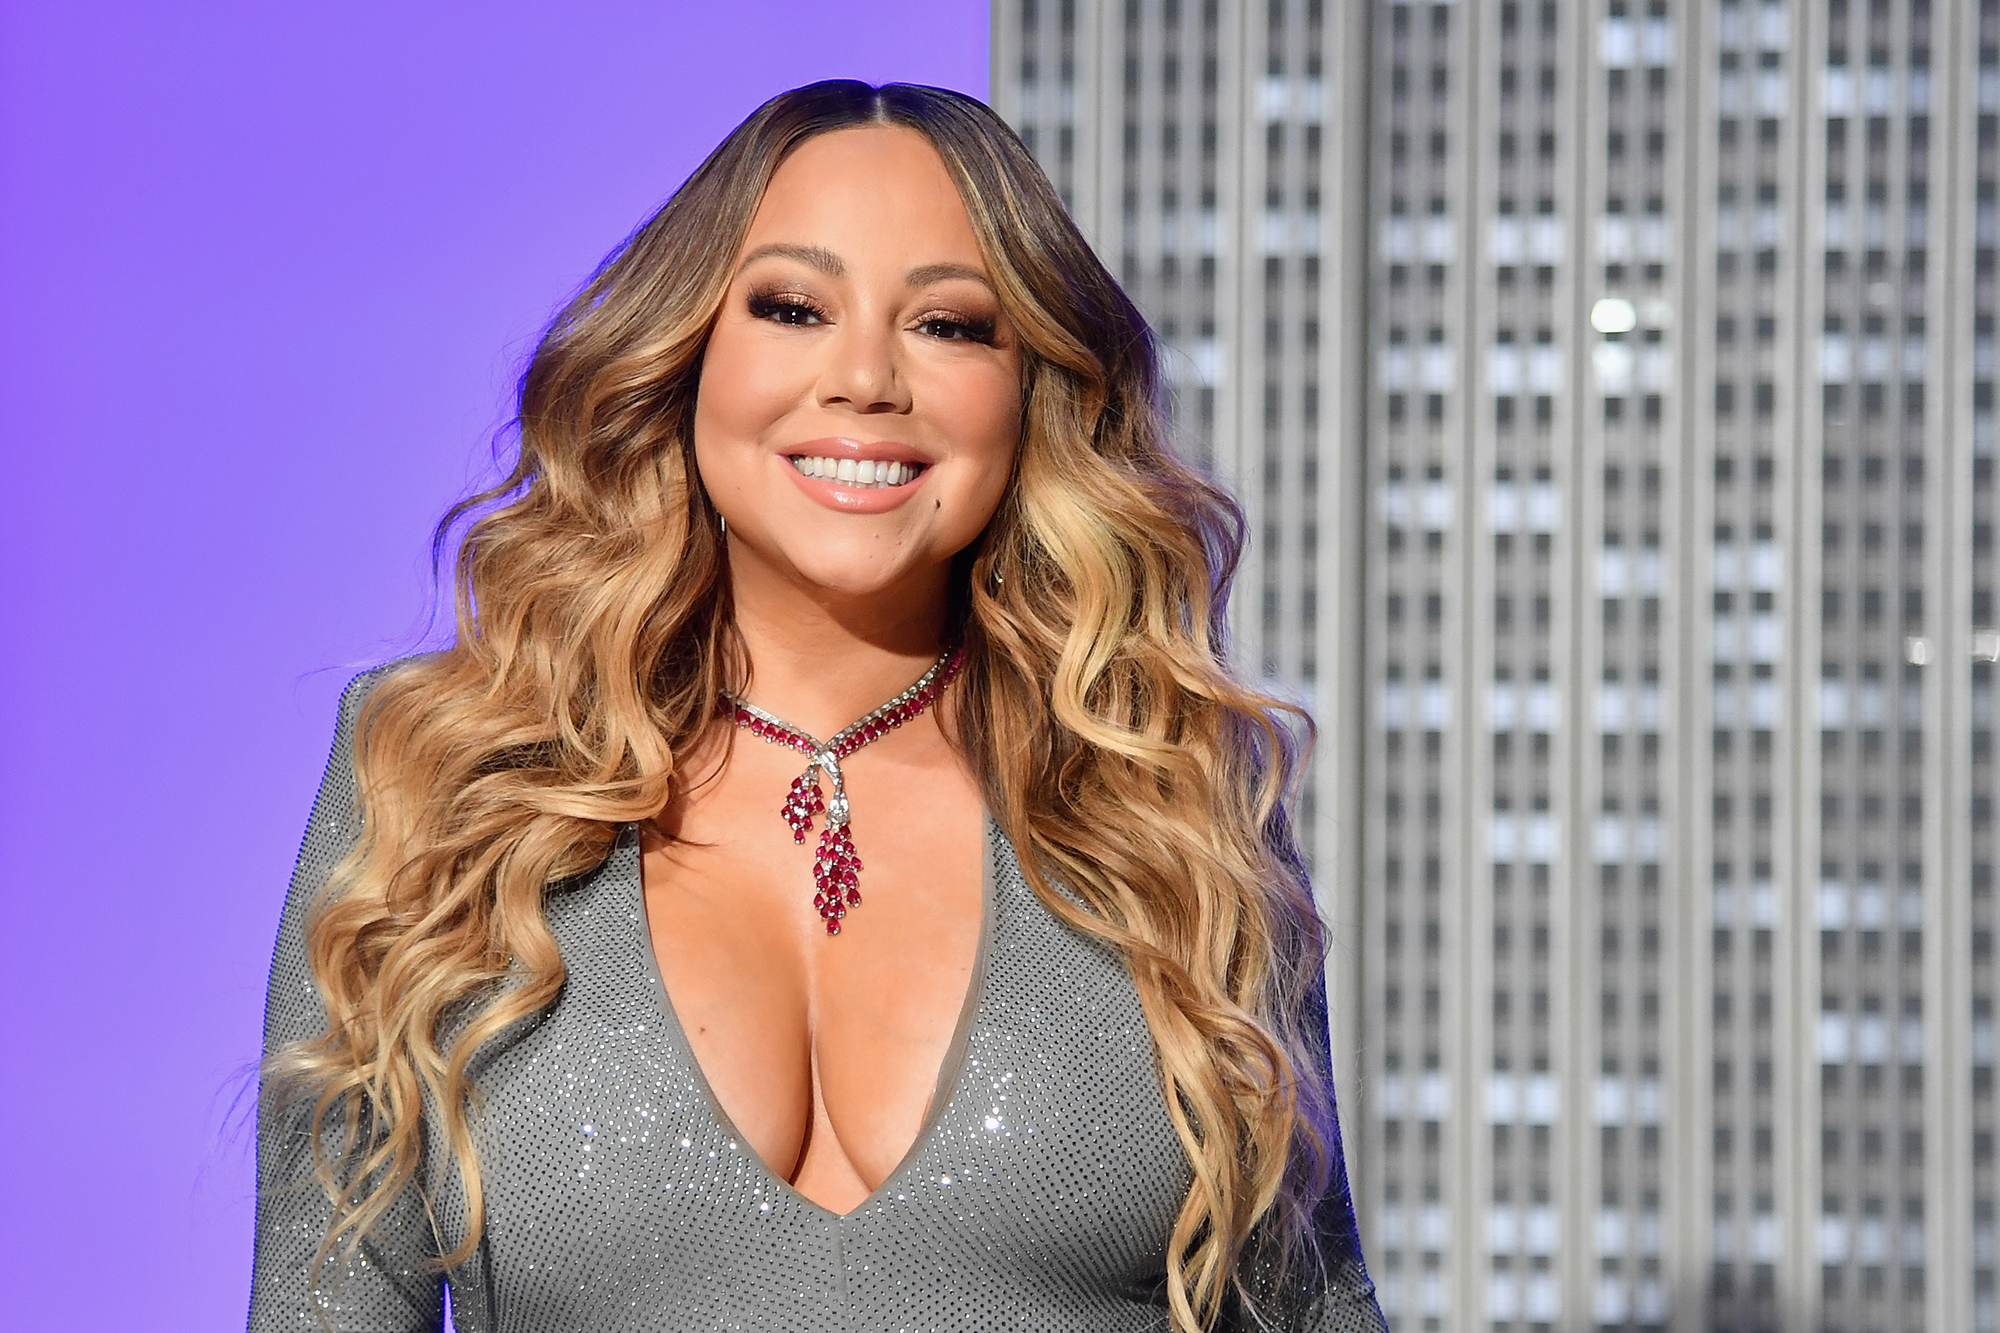 Mariah Carey ready for Valentine’s Day with ‘Always Be My Baby’ Snapchat challenge